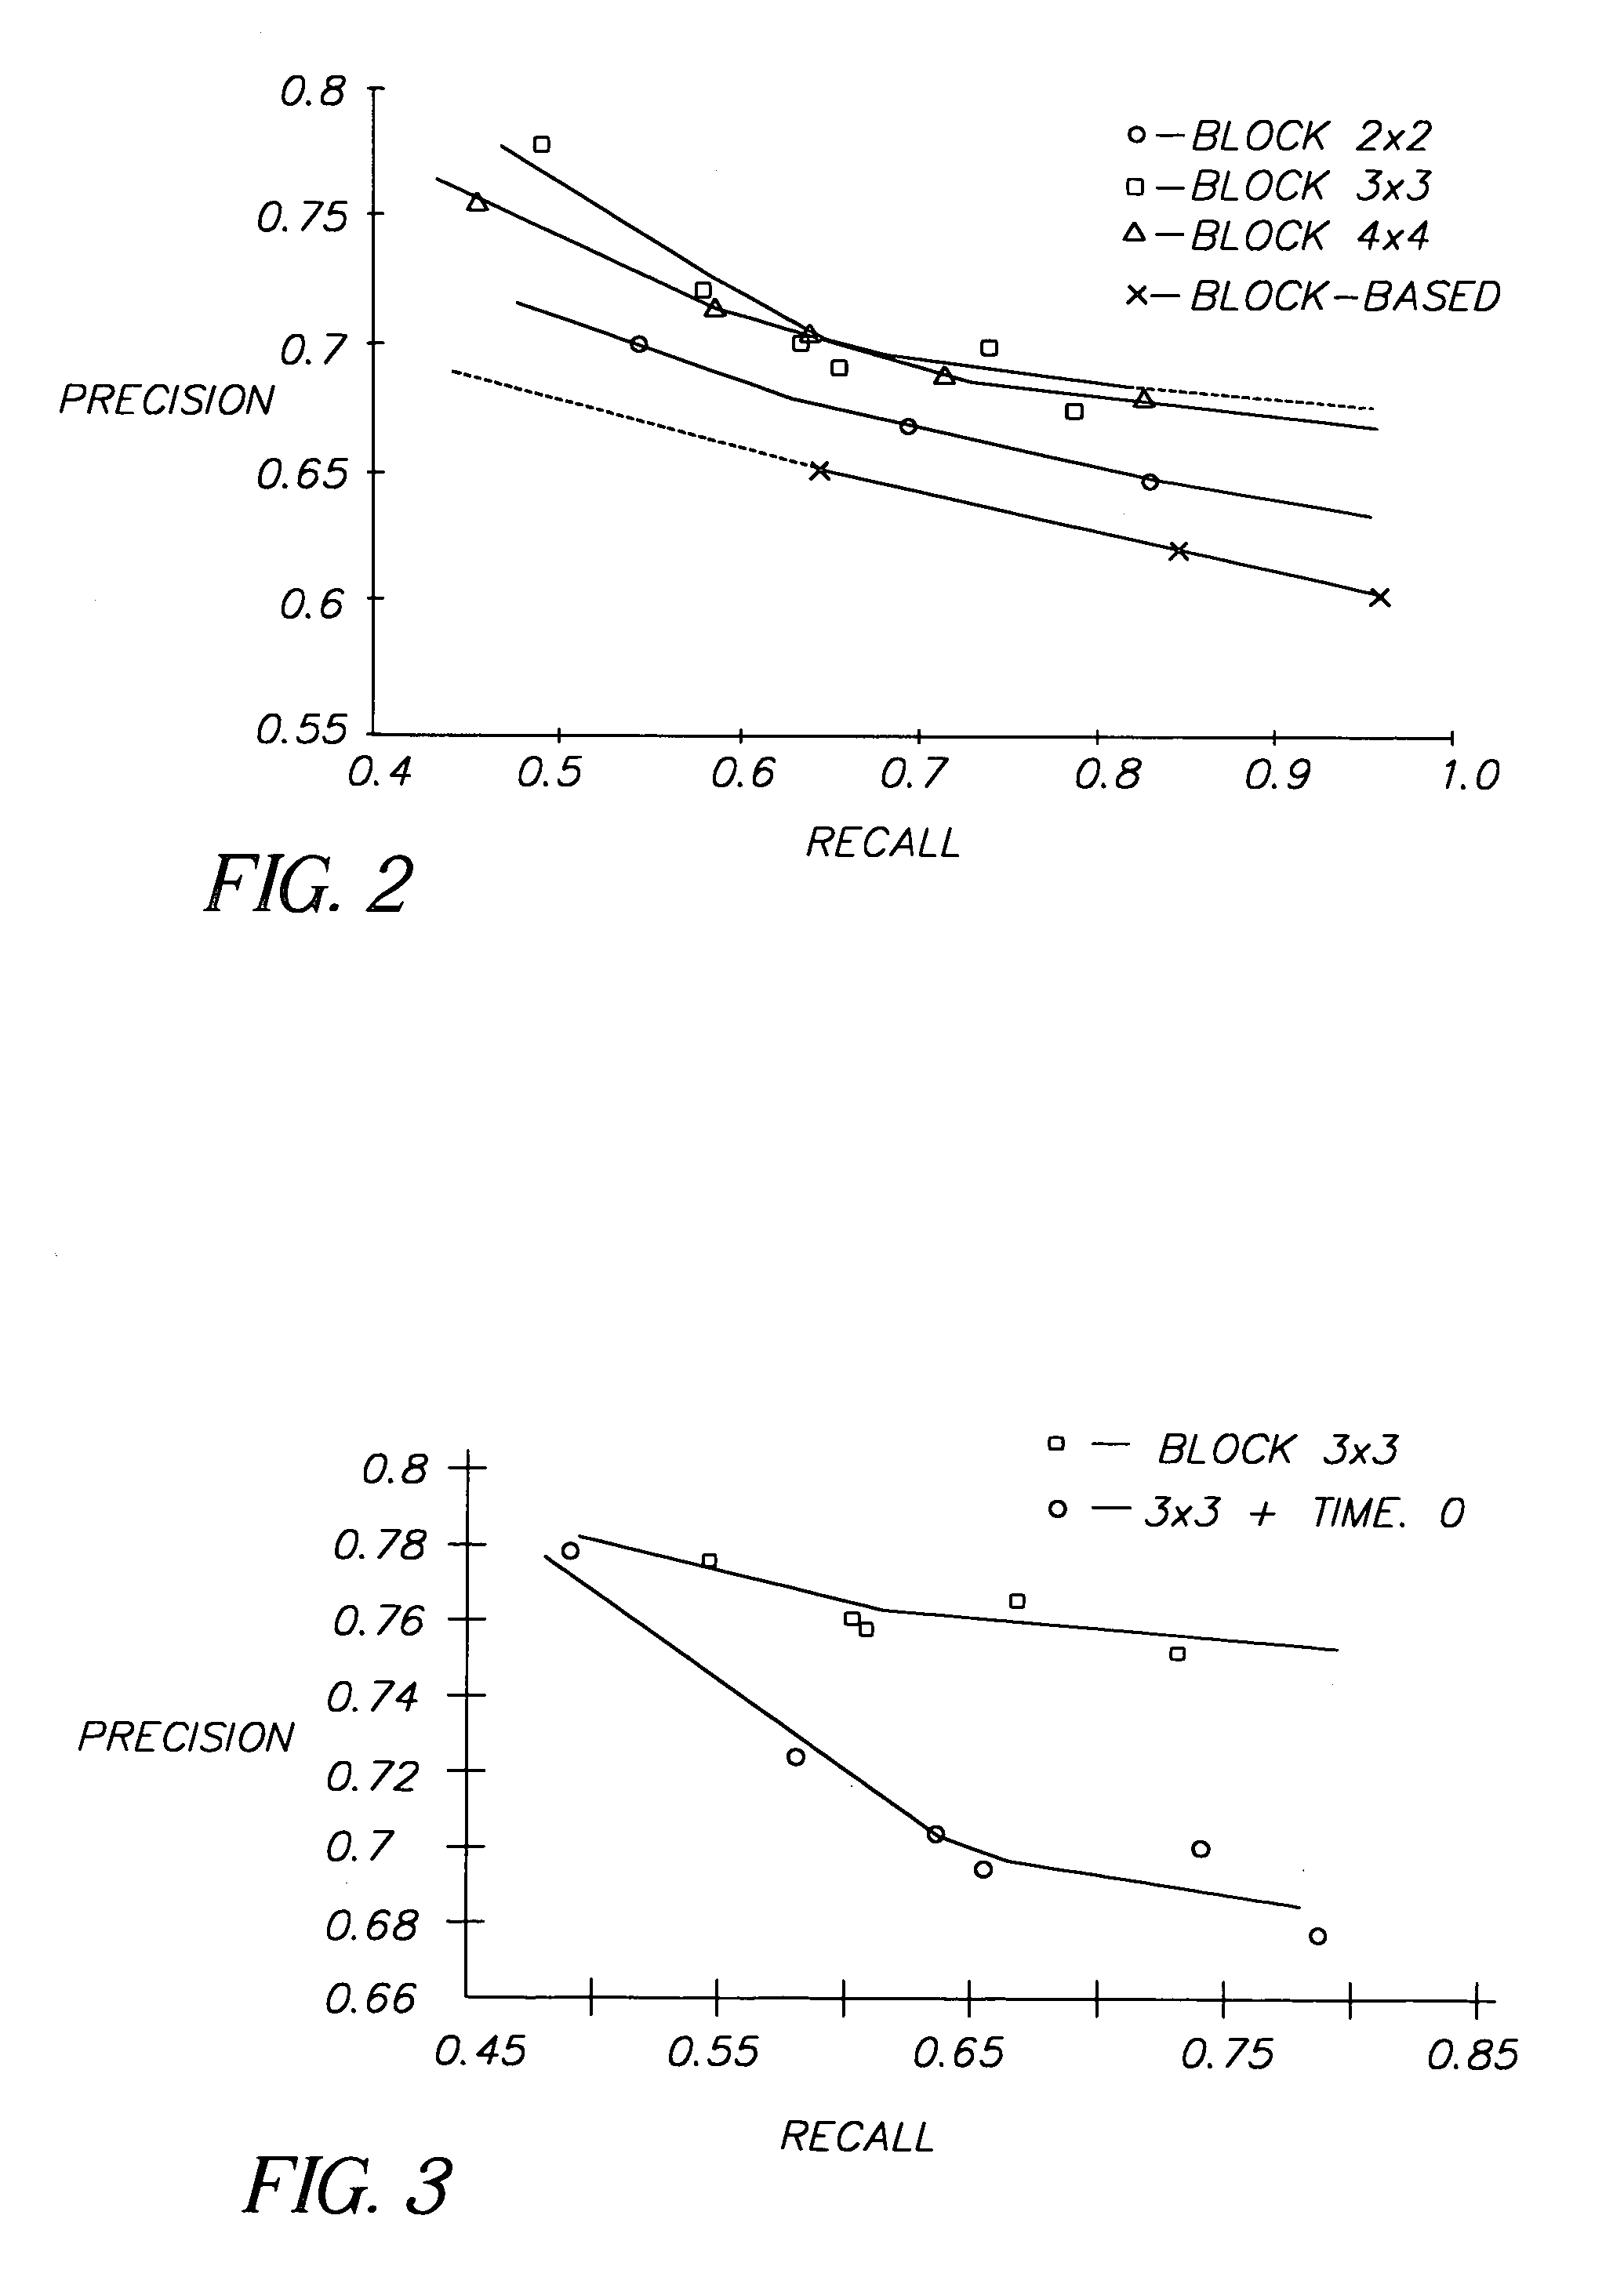 Method of detecting duplicate pictures in an automatic albuming system